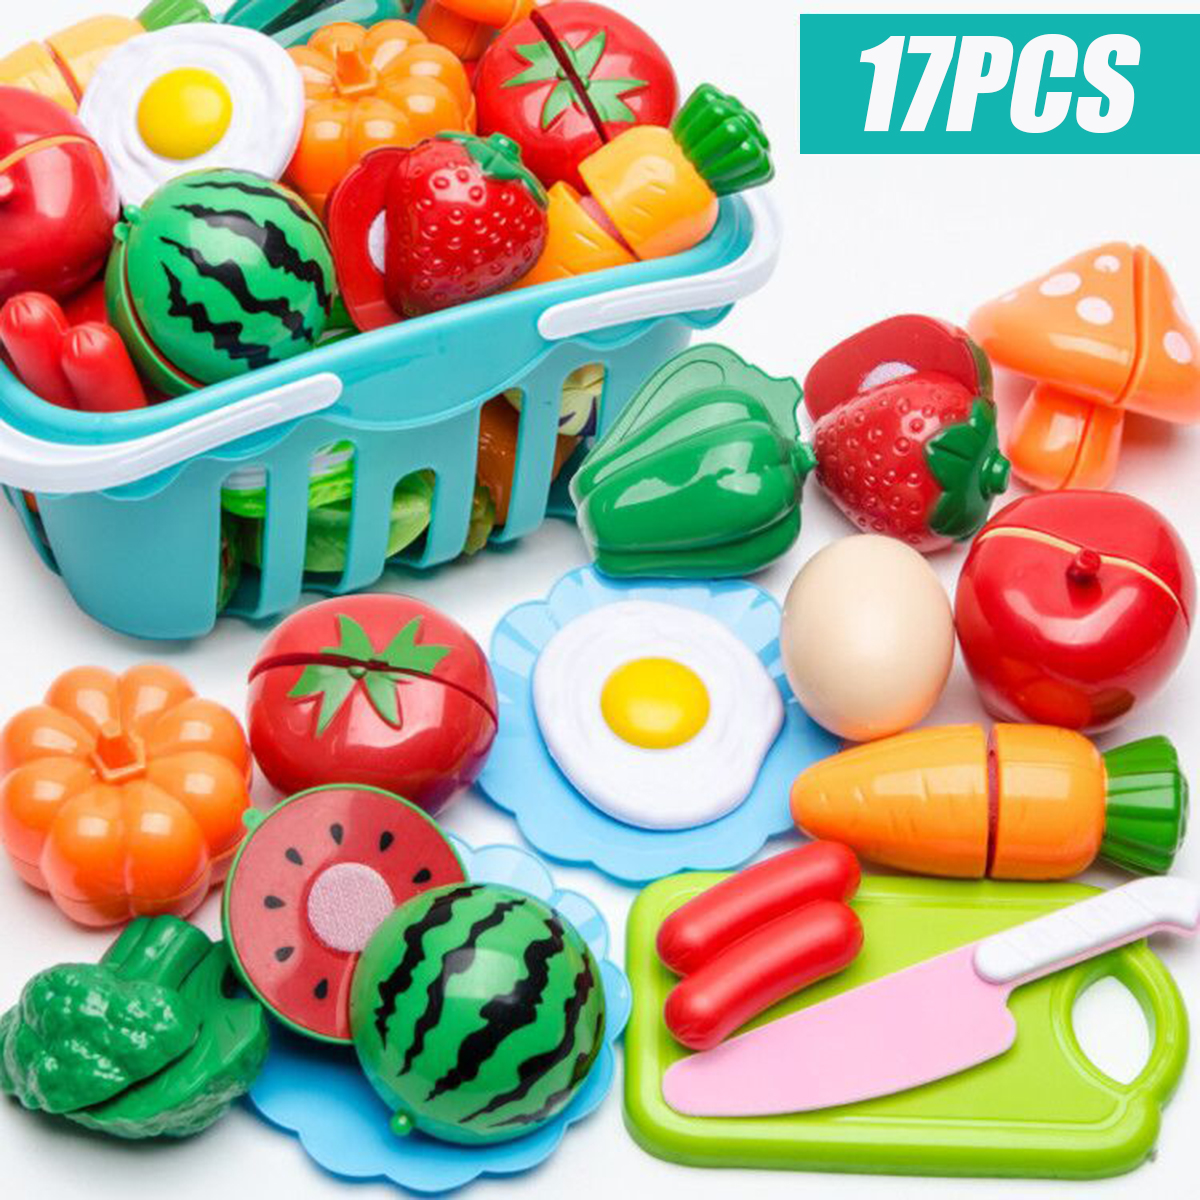 24pcs Kids Toy Pretend Role Play Kitchen Fruit Vegetable Cake Food Cutting Sets 